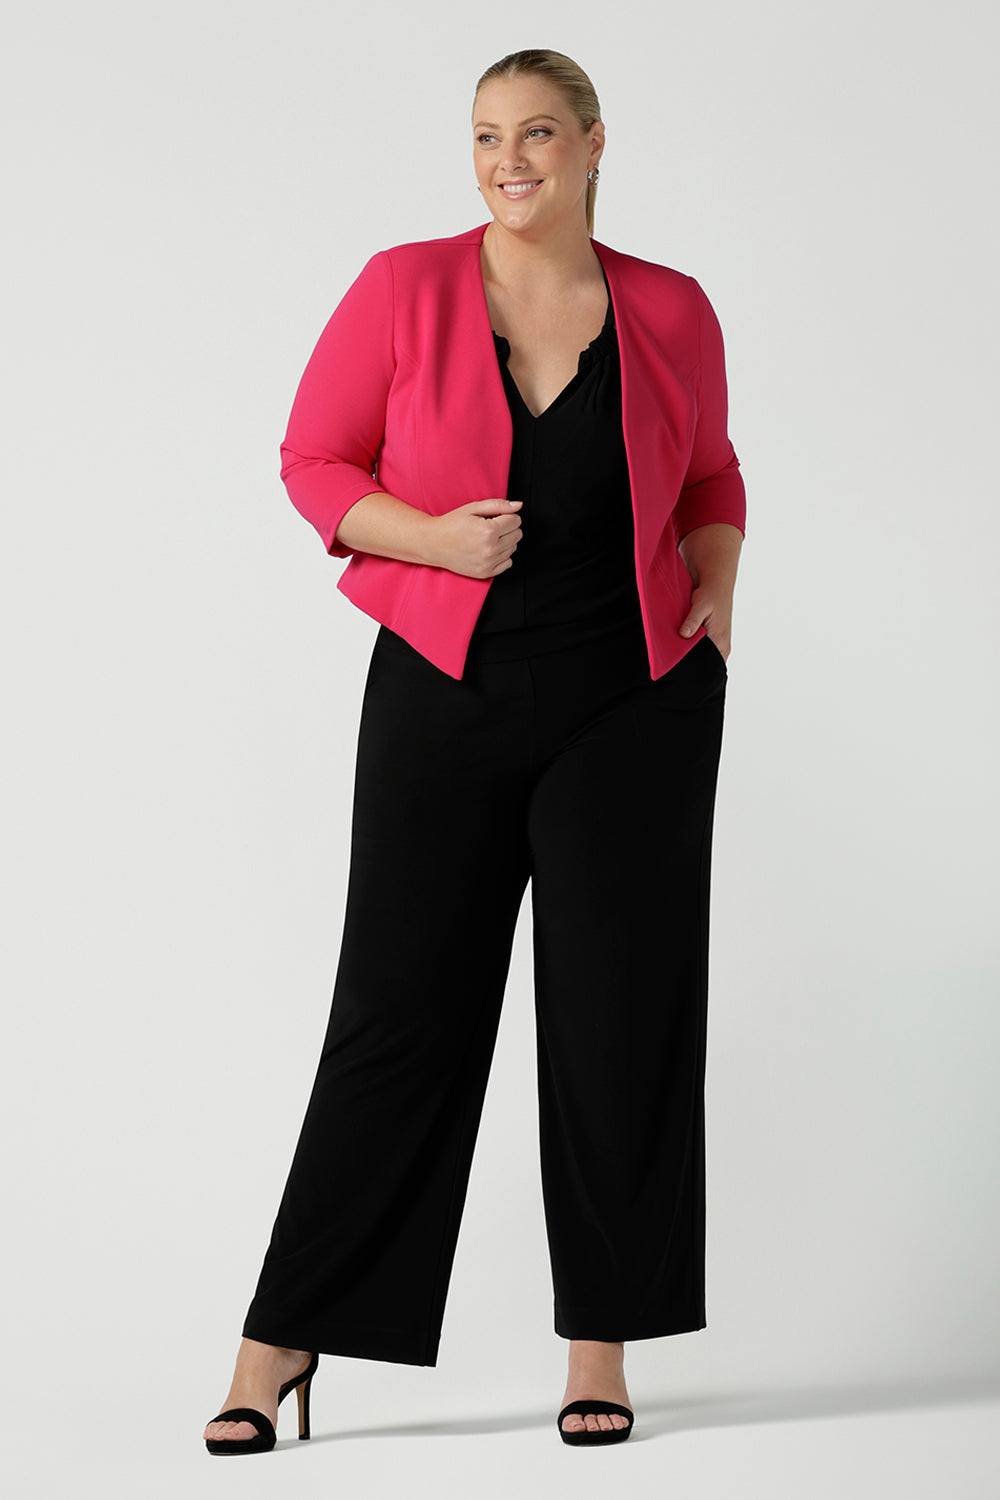 Plus size 18 women wears jumpsuit for curvy women. This black jumpsuit features a halter neck with side pockets and straight legs. Made in Australia in navy stretch jersey this jumpsuit is comfortable for work or weekend wear.  Styled with a pink workwear jacket. 